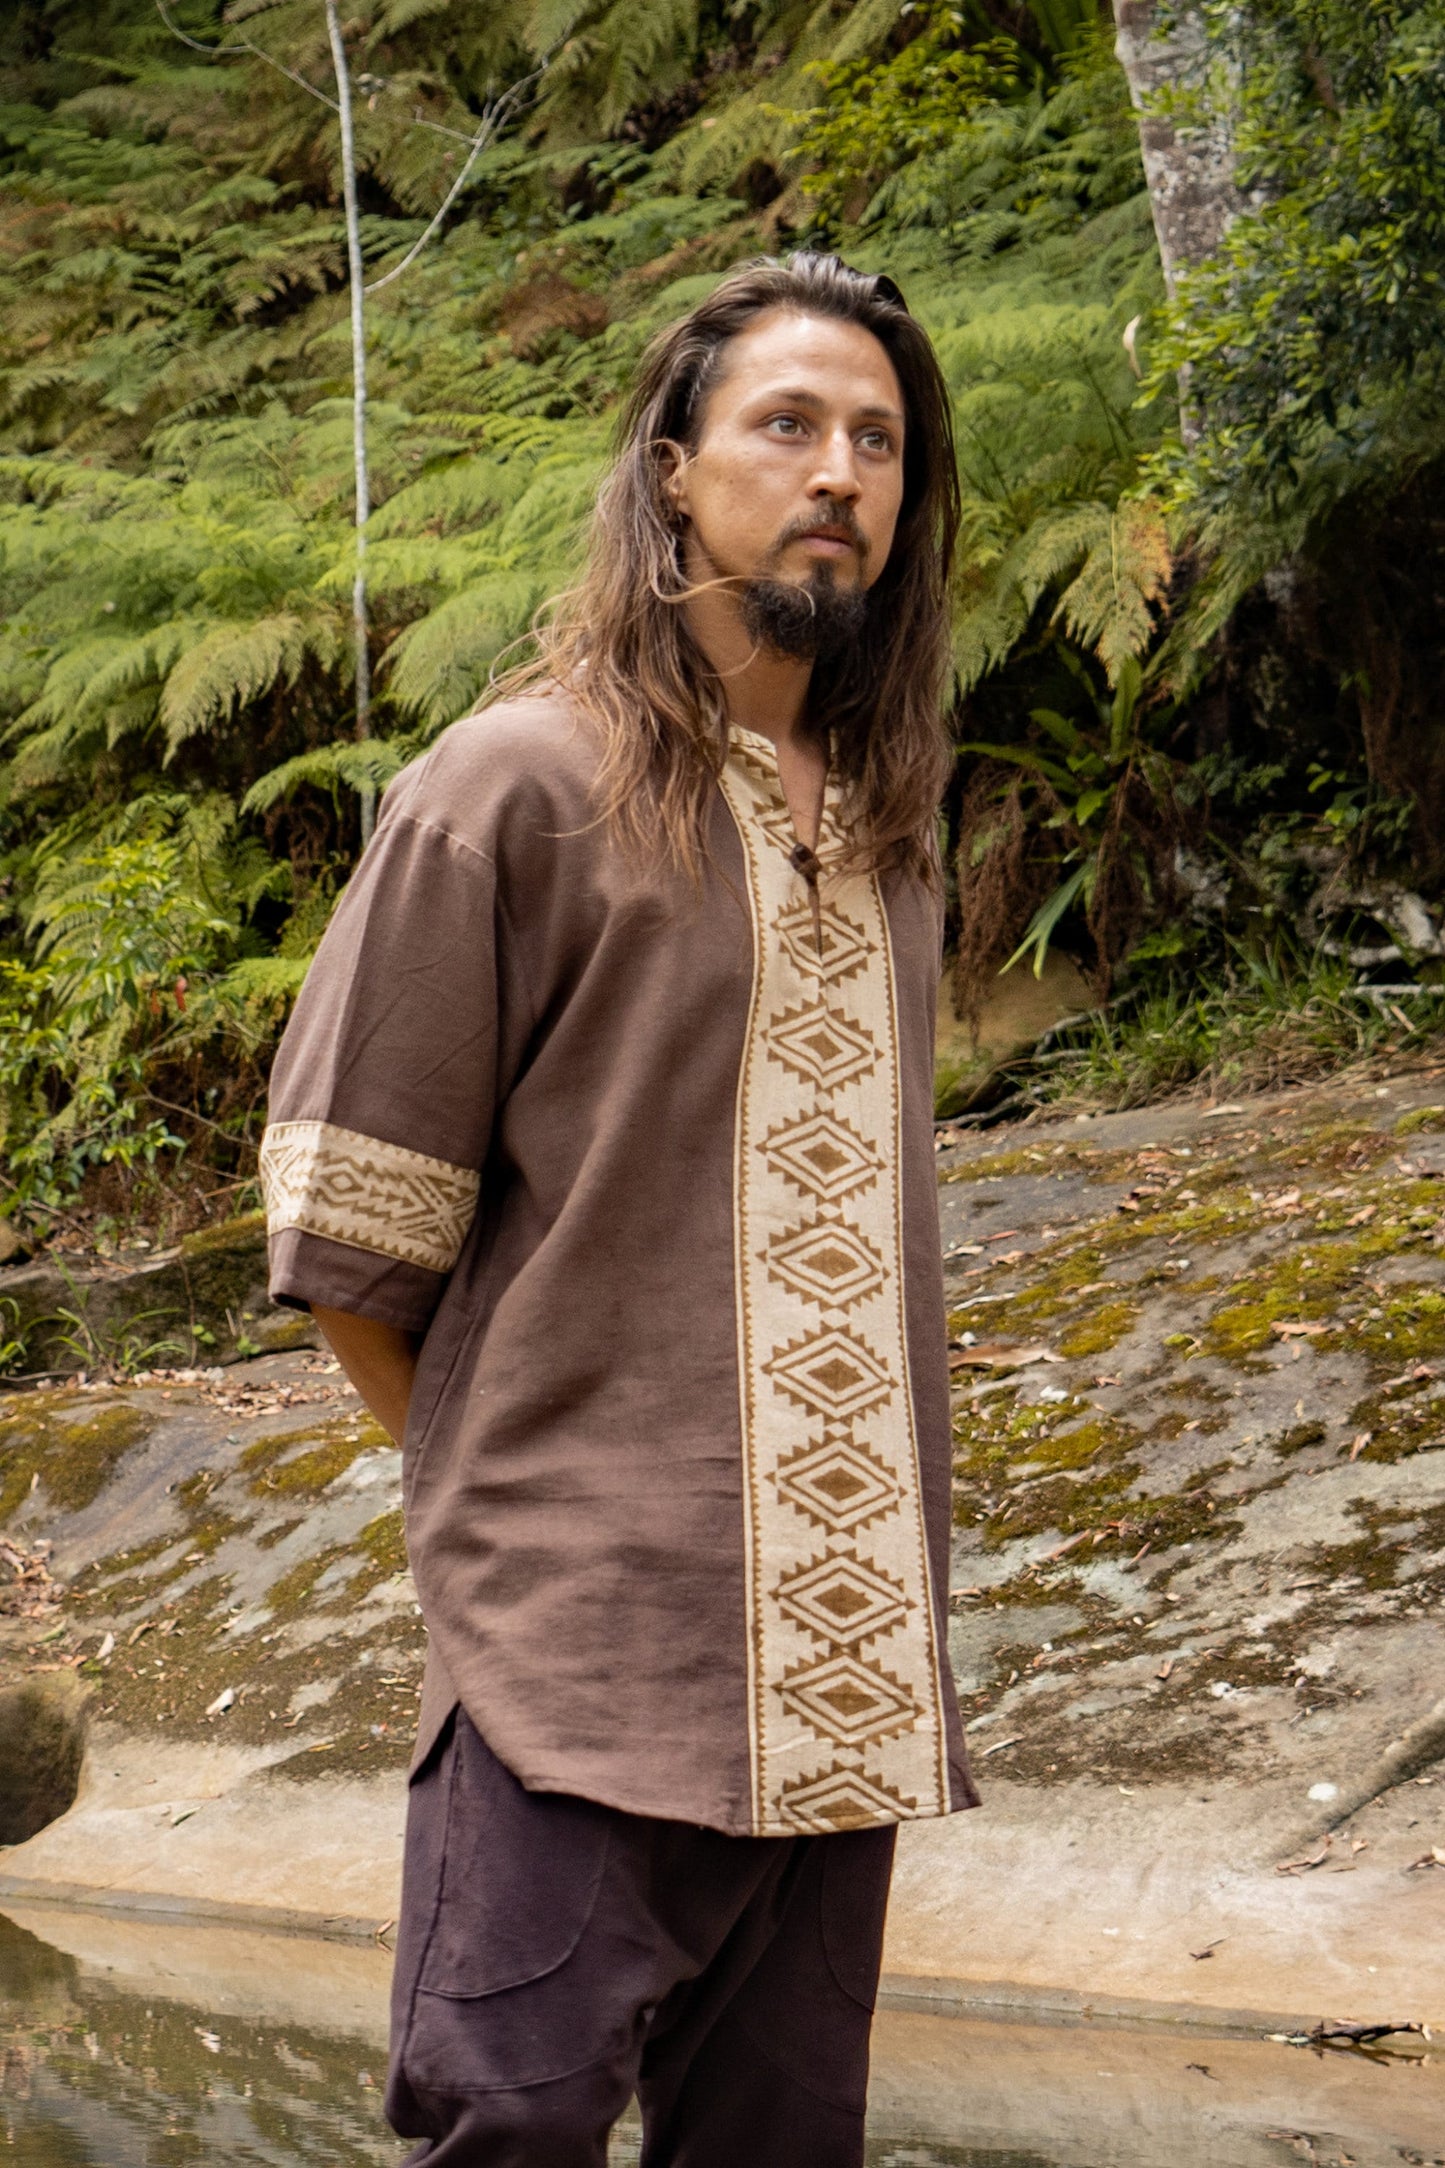 Behold our MAHADI top, a Ceremonial Shamanic Shirt, a one-of-a-kind garment that brings a touch of cultural tradition to any occasion. Made from natural cotton, this loose-fit shirt is both comfortable and environmentally friendly.